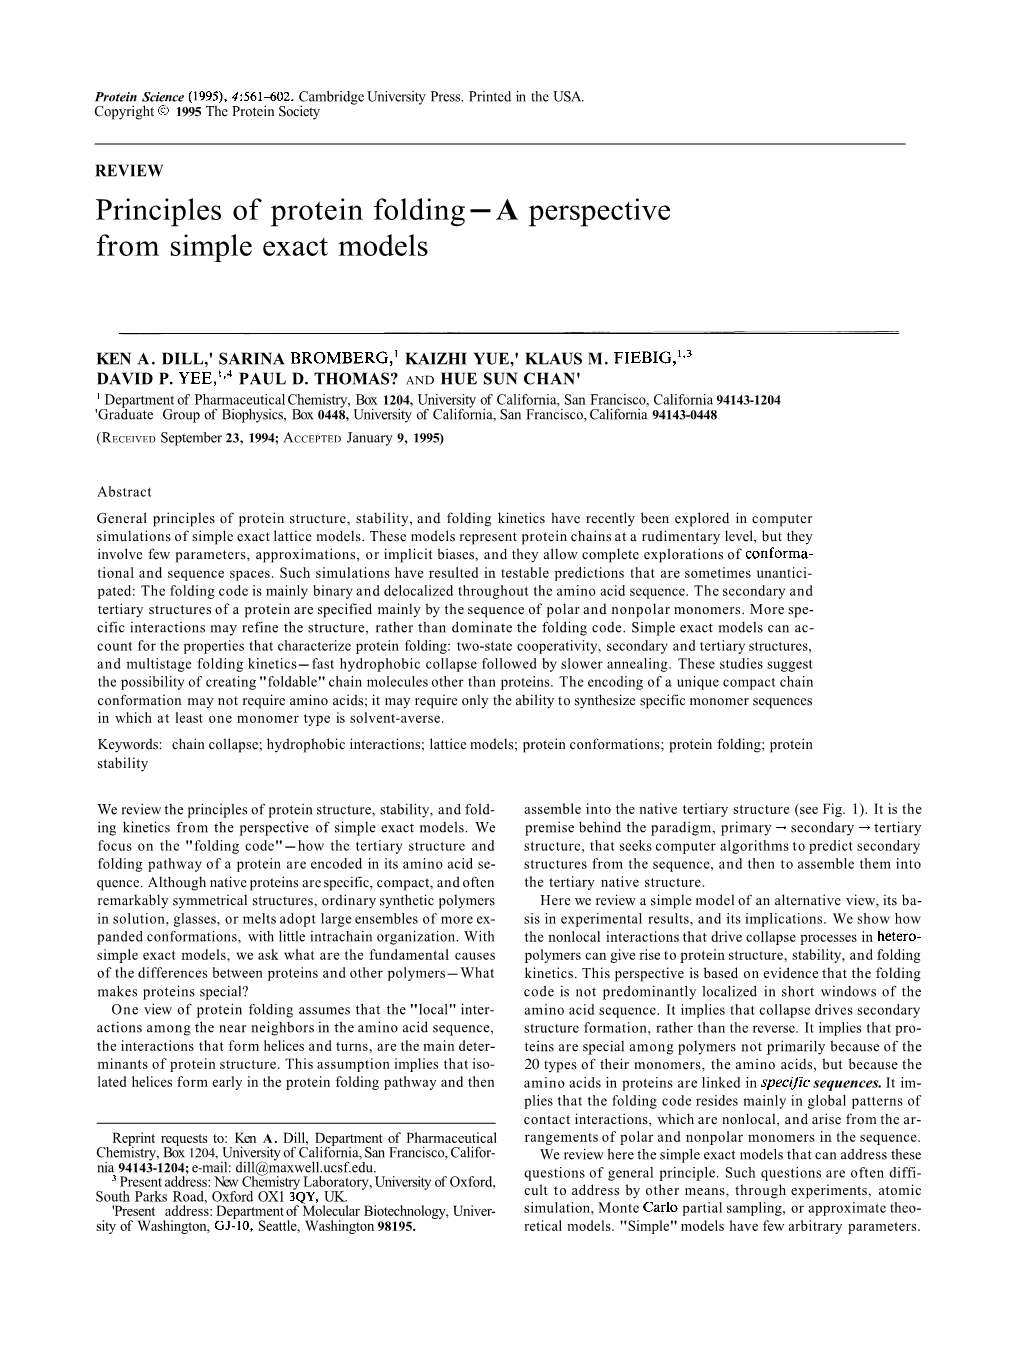 Principles of Protein Folding - a Perspective from Simple Exact Models